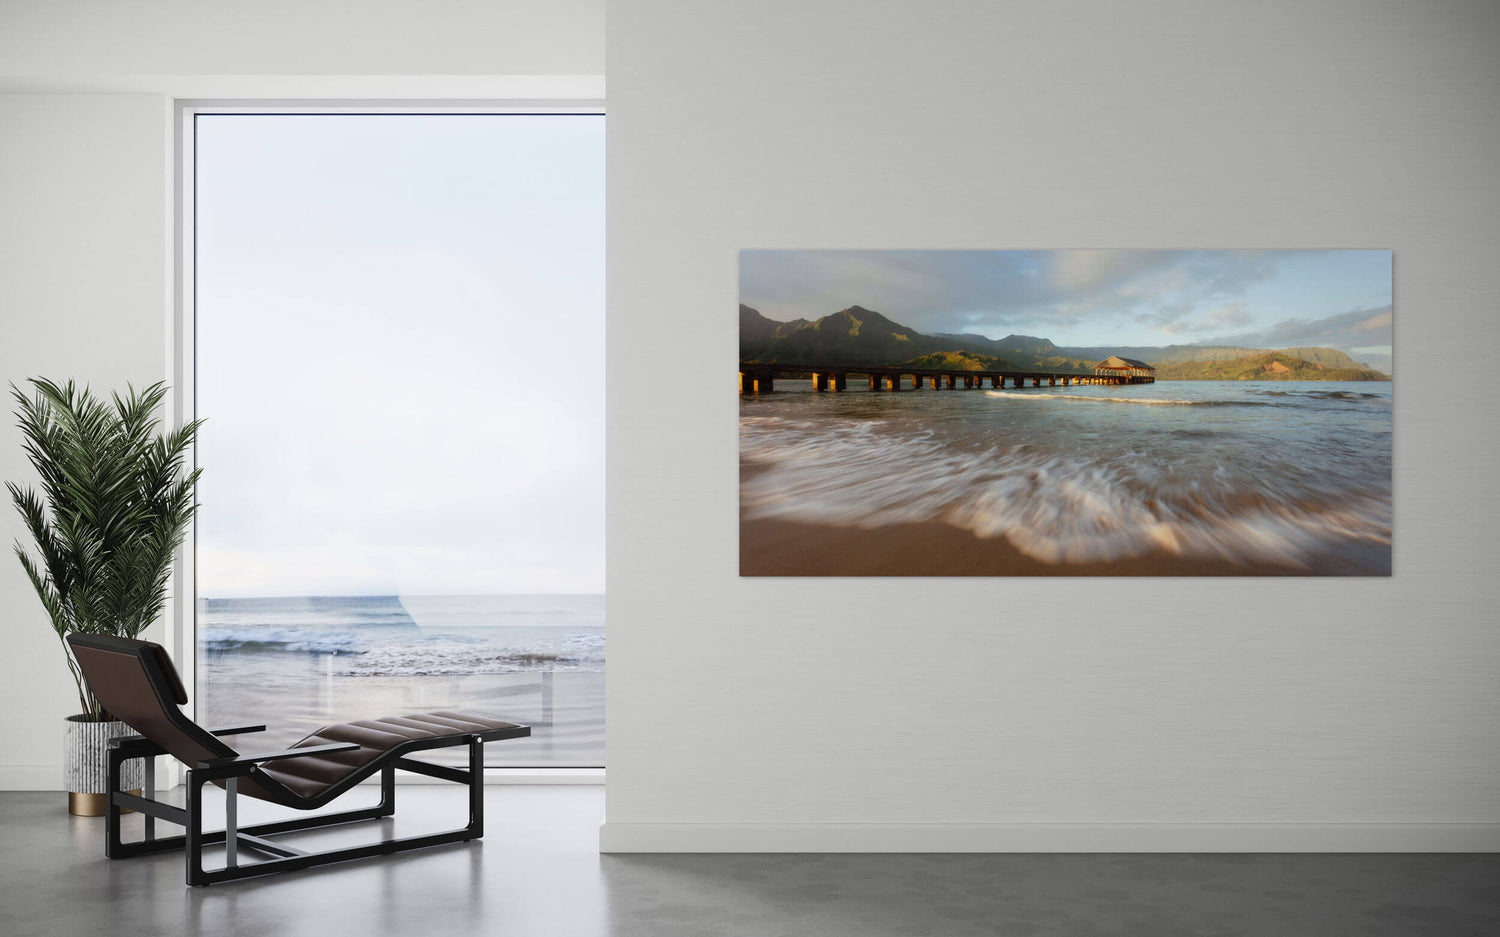 A Hanalei Bay sunrise picture from Kauai hangs in a living room.